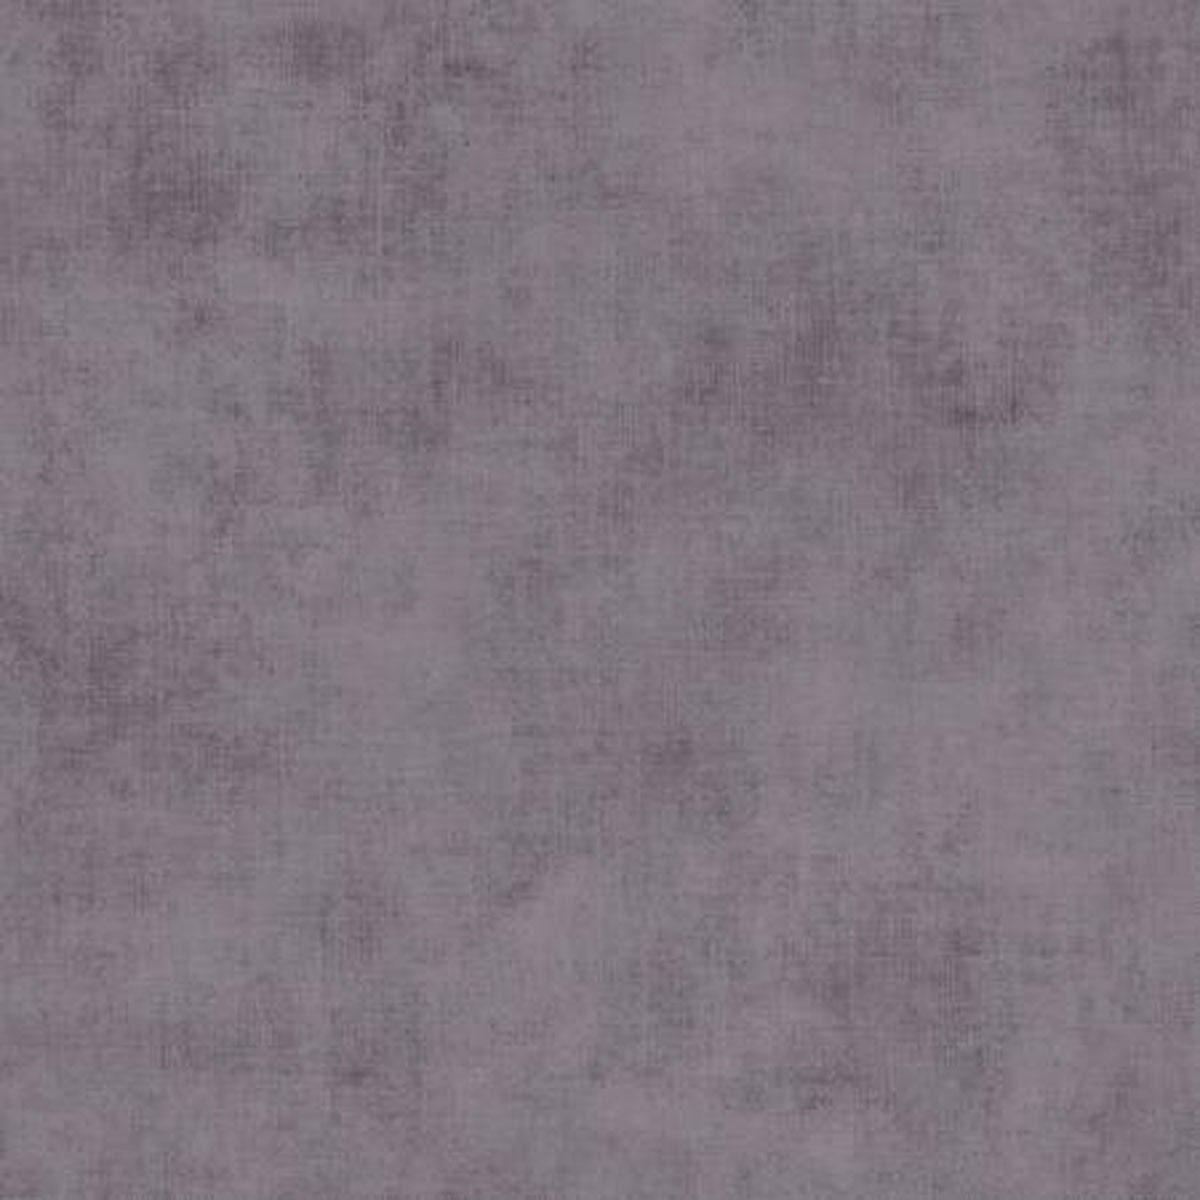 Granite Shades Blender Fabric By Riley Blake - Sold in 1/2 Yard Increments